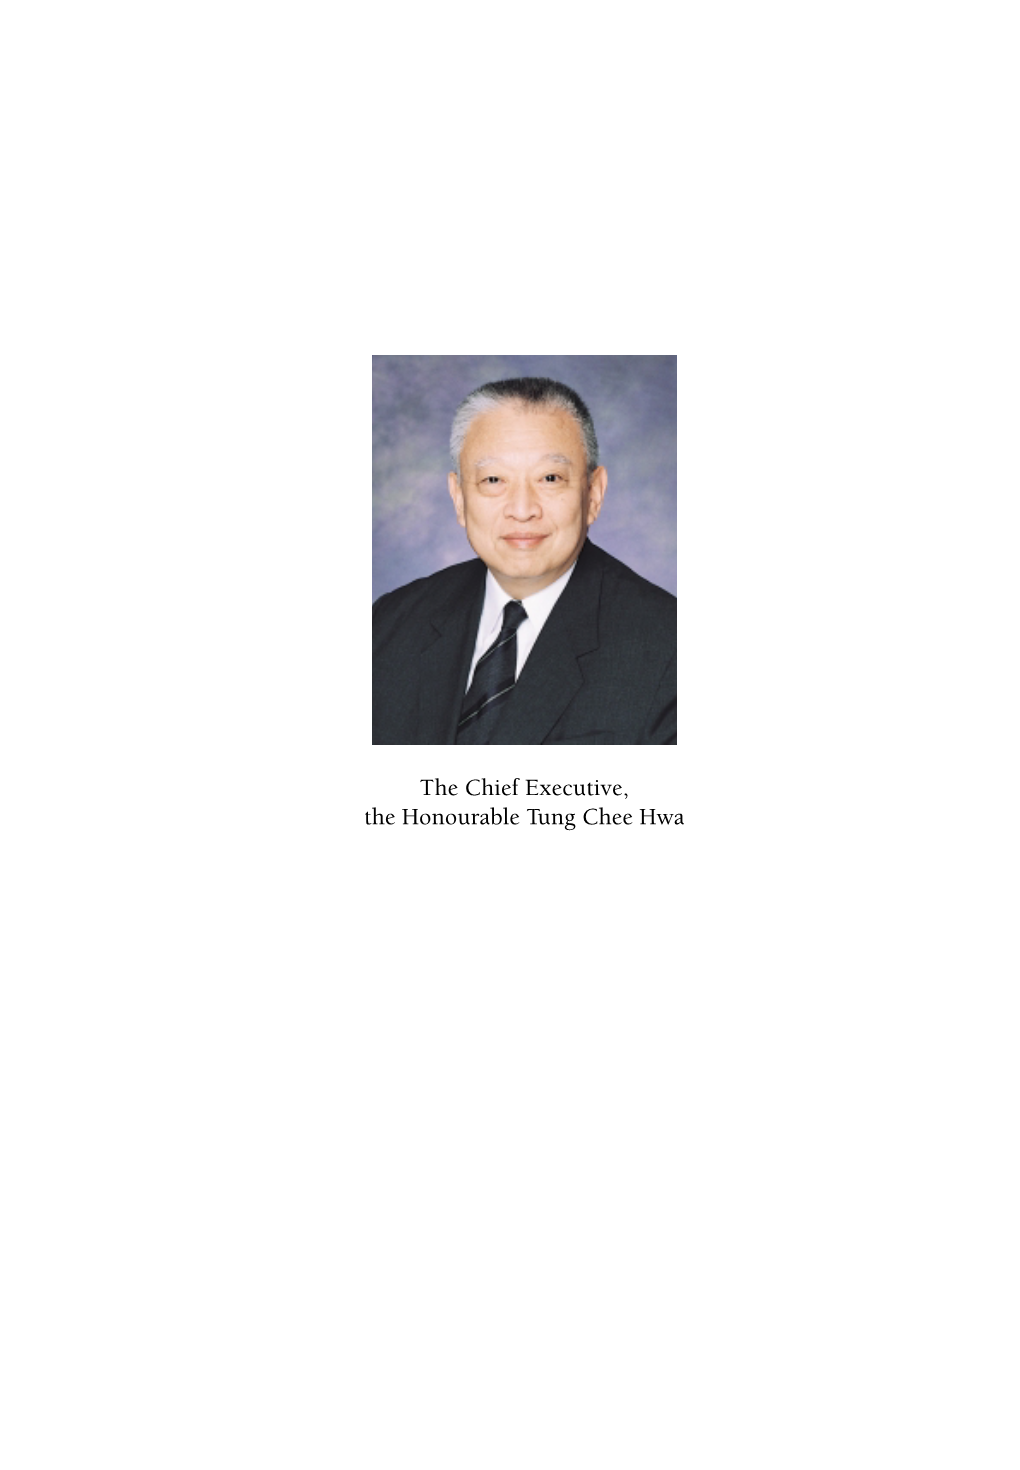 The Chief Executive, the Honourable Tung Chee Hwa the 1999 Policy Address Contents